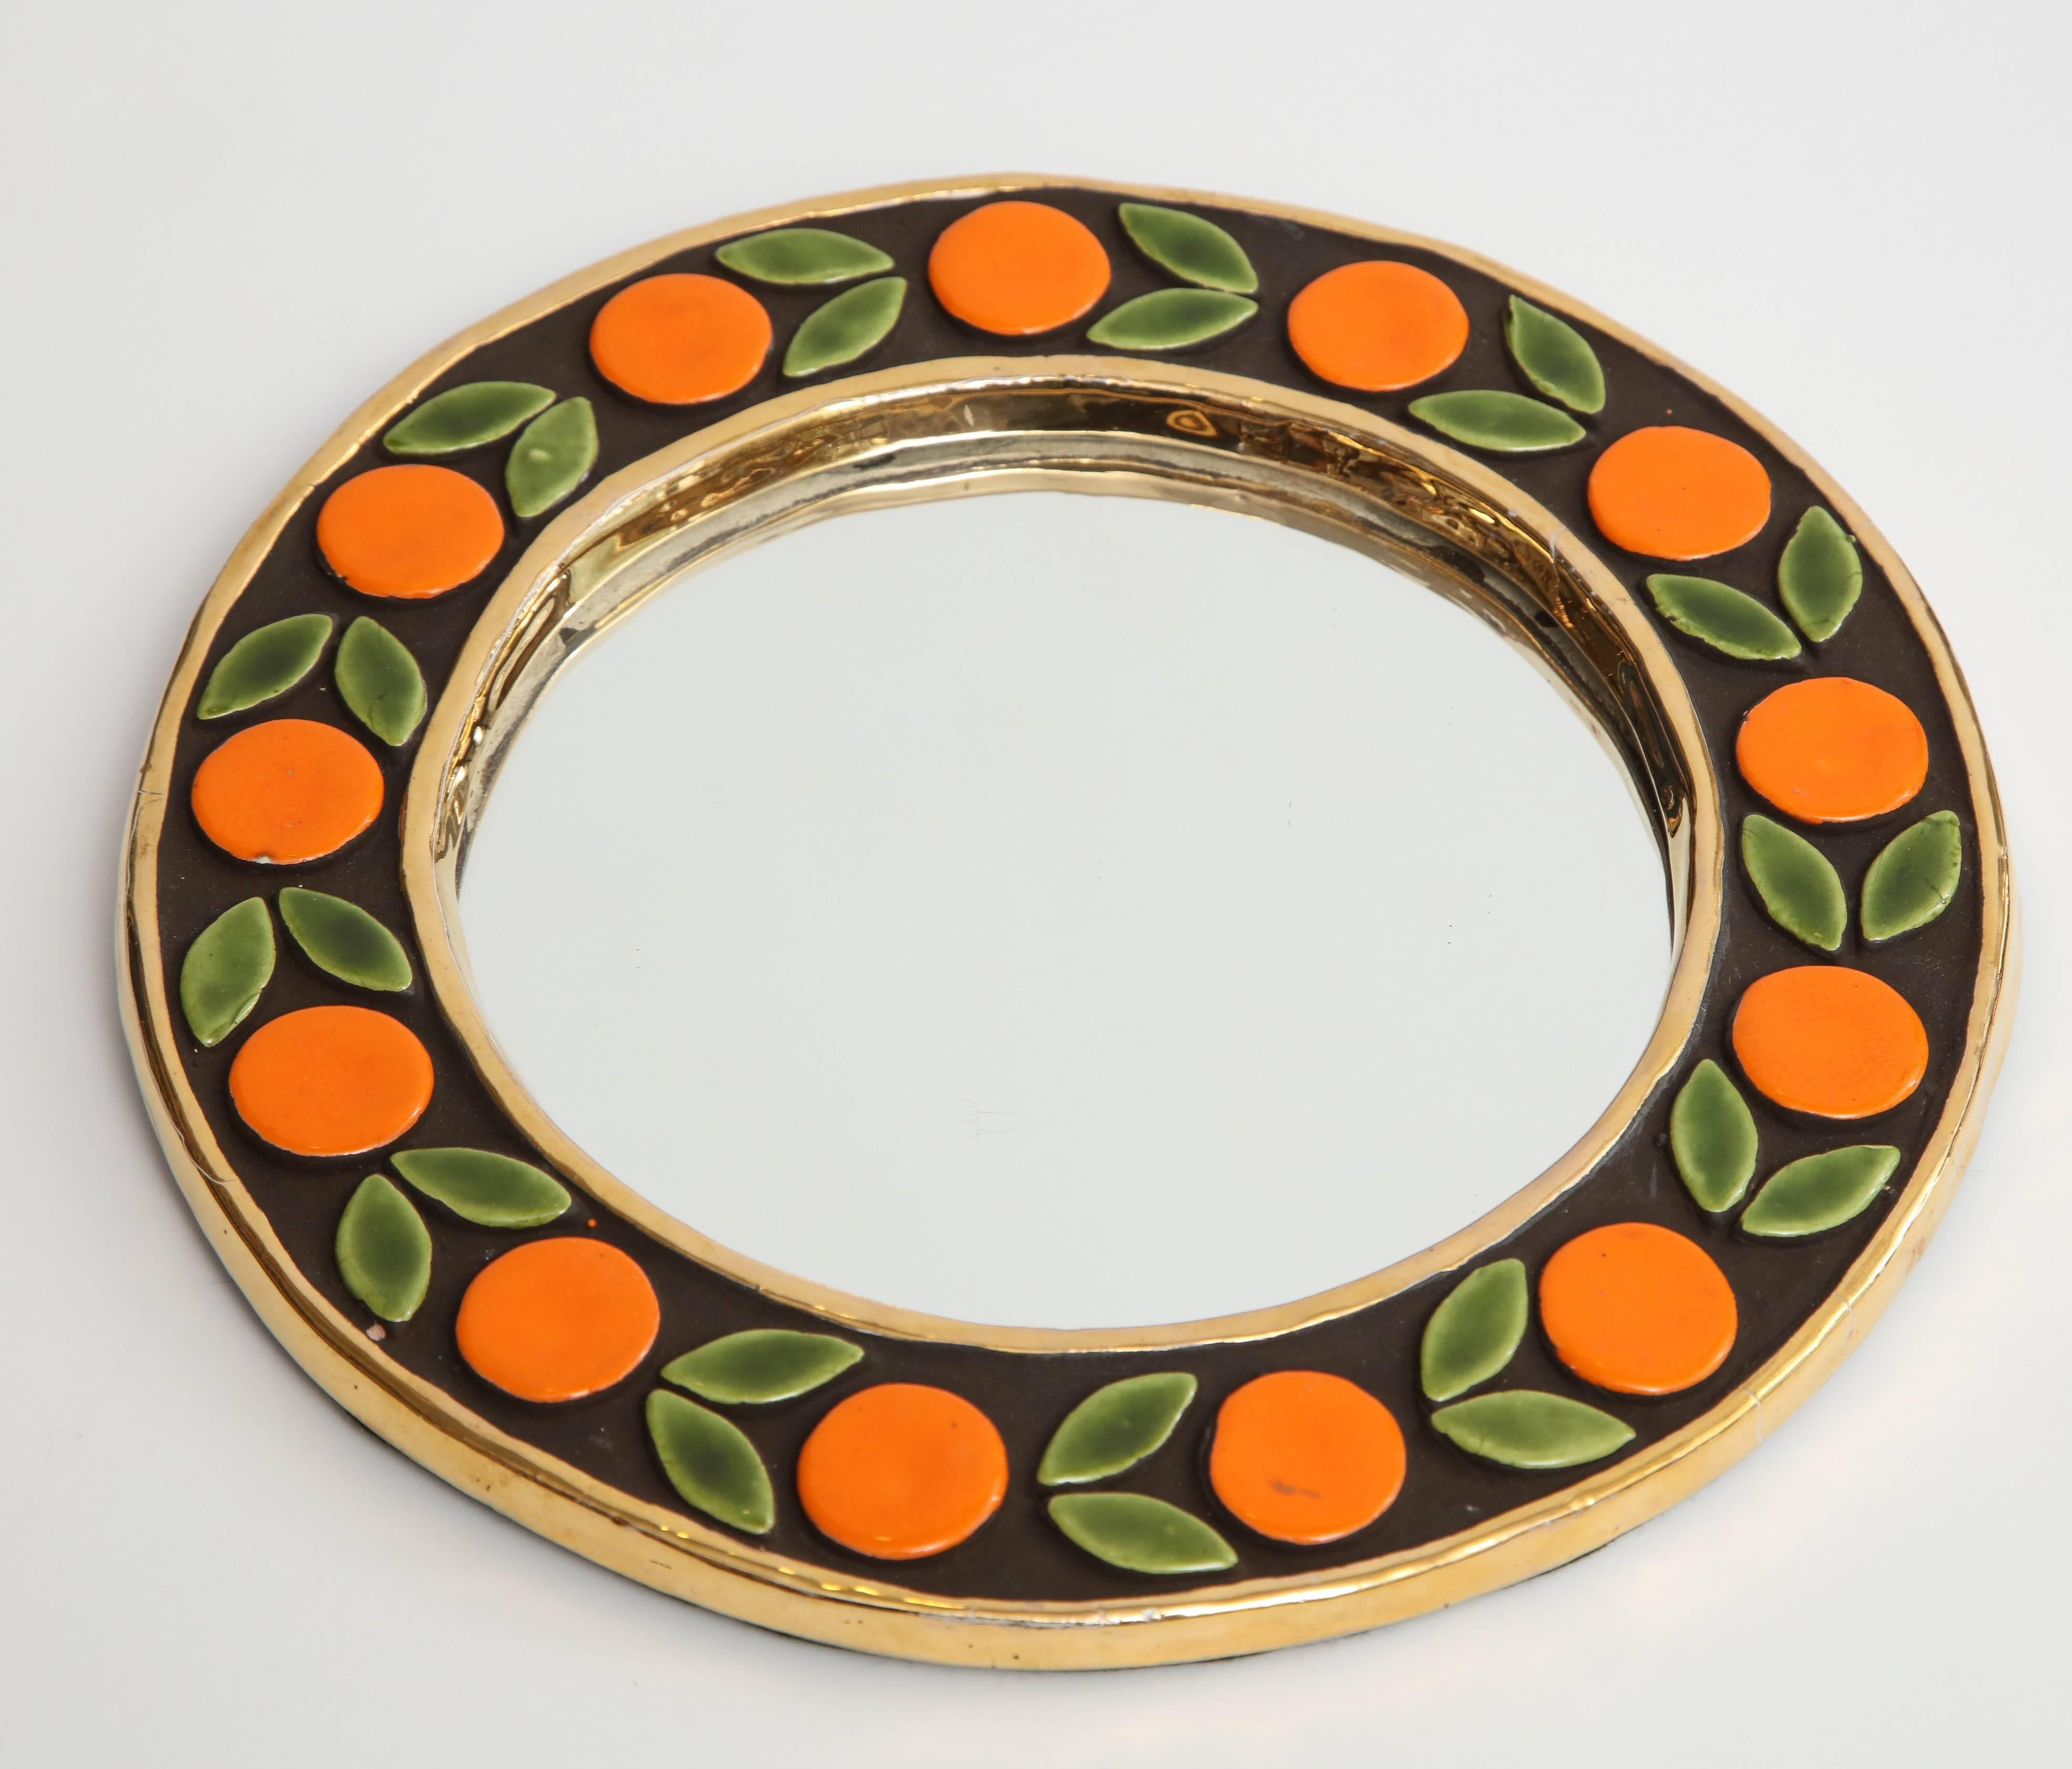 A lovely small, round mirror created by Mithé Espelt in France, circa 1960. The frame is decorated in a gold metallic glaze and the design in a shiny enamel of rich brown, orange and green.